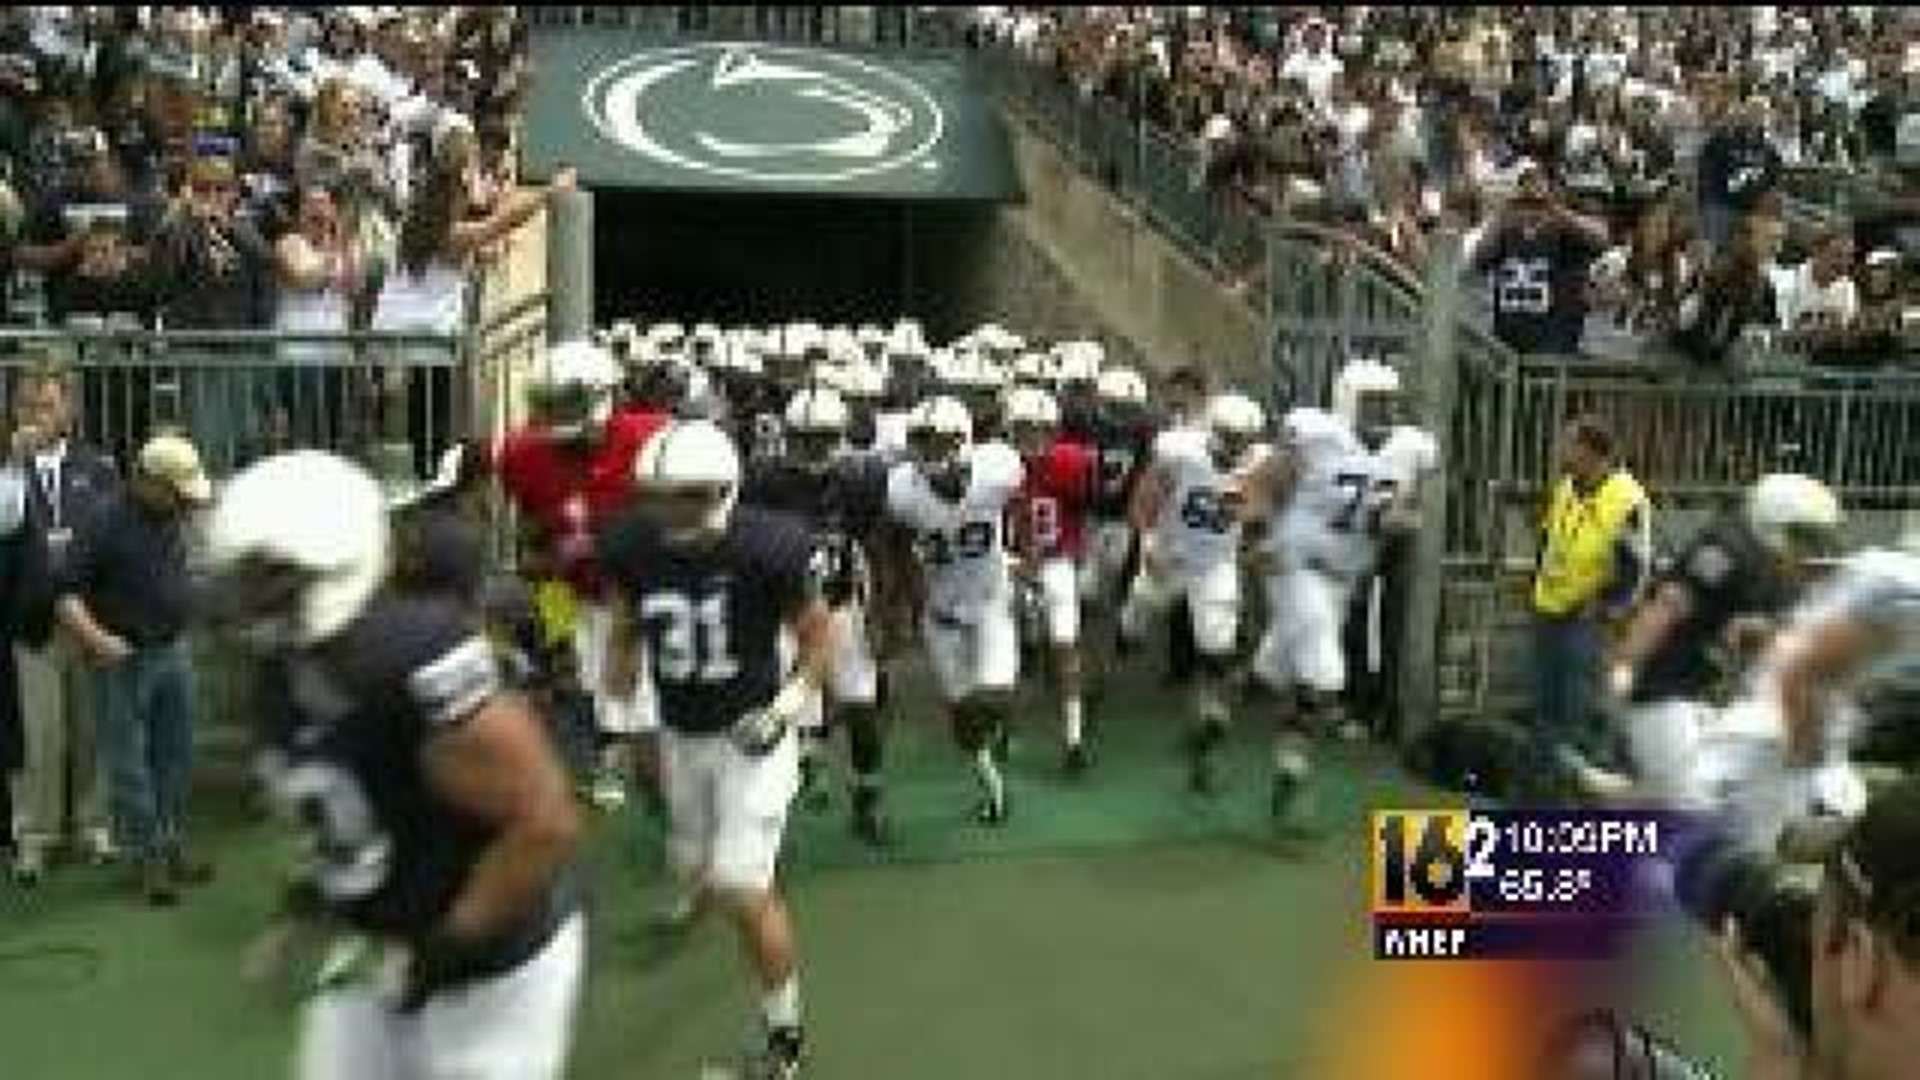 Excitement Over Penn State Opener